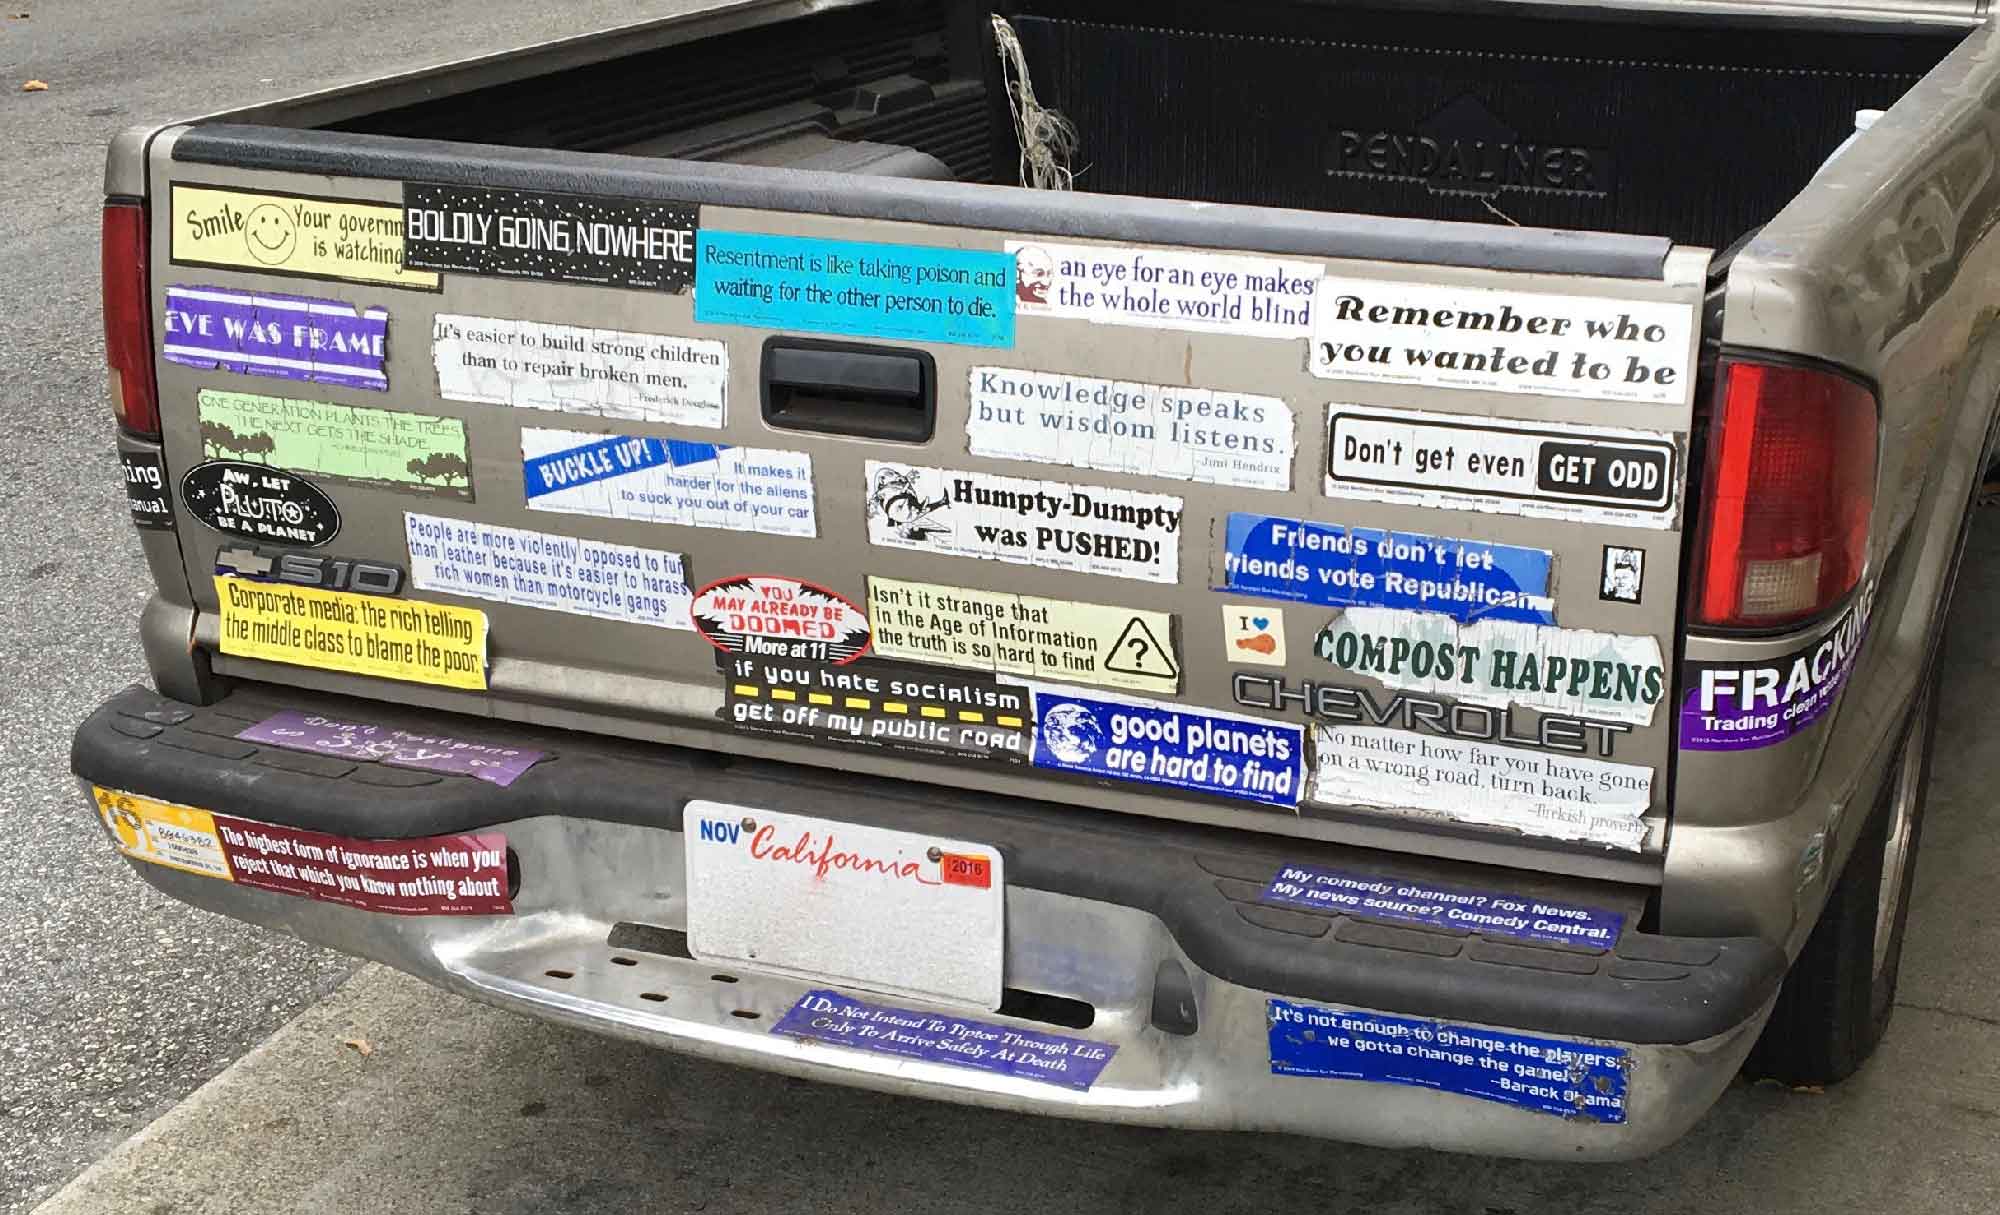 Study Finds Link Between Bumper Stickers and Road Rage